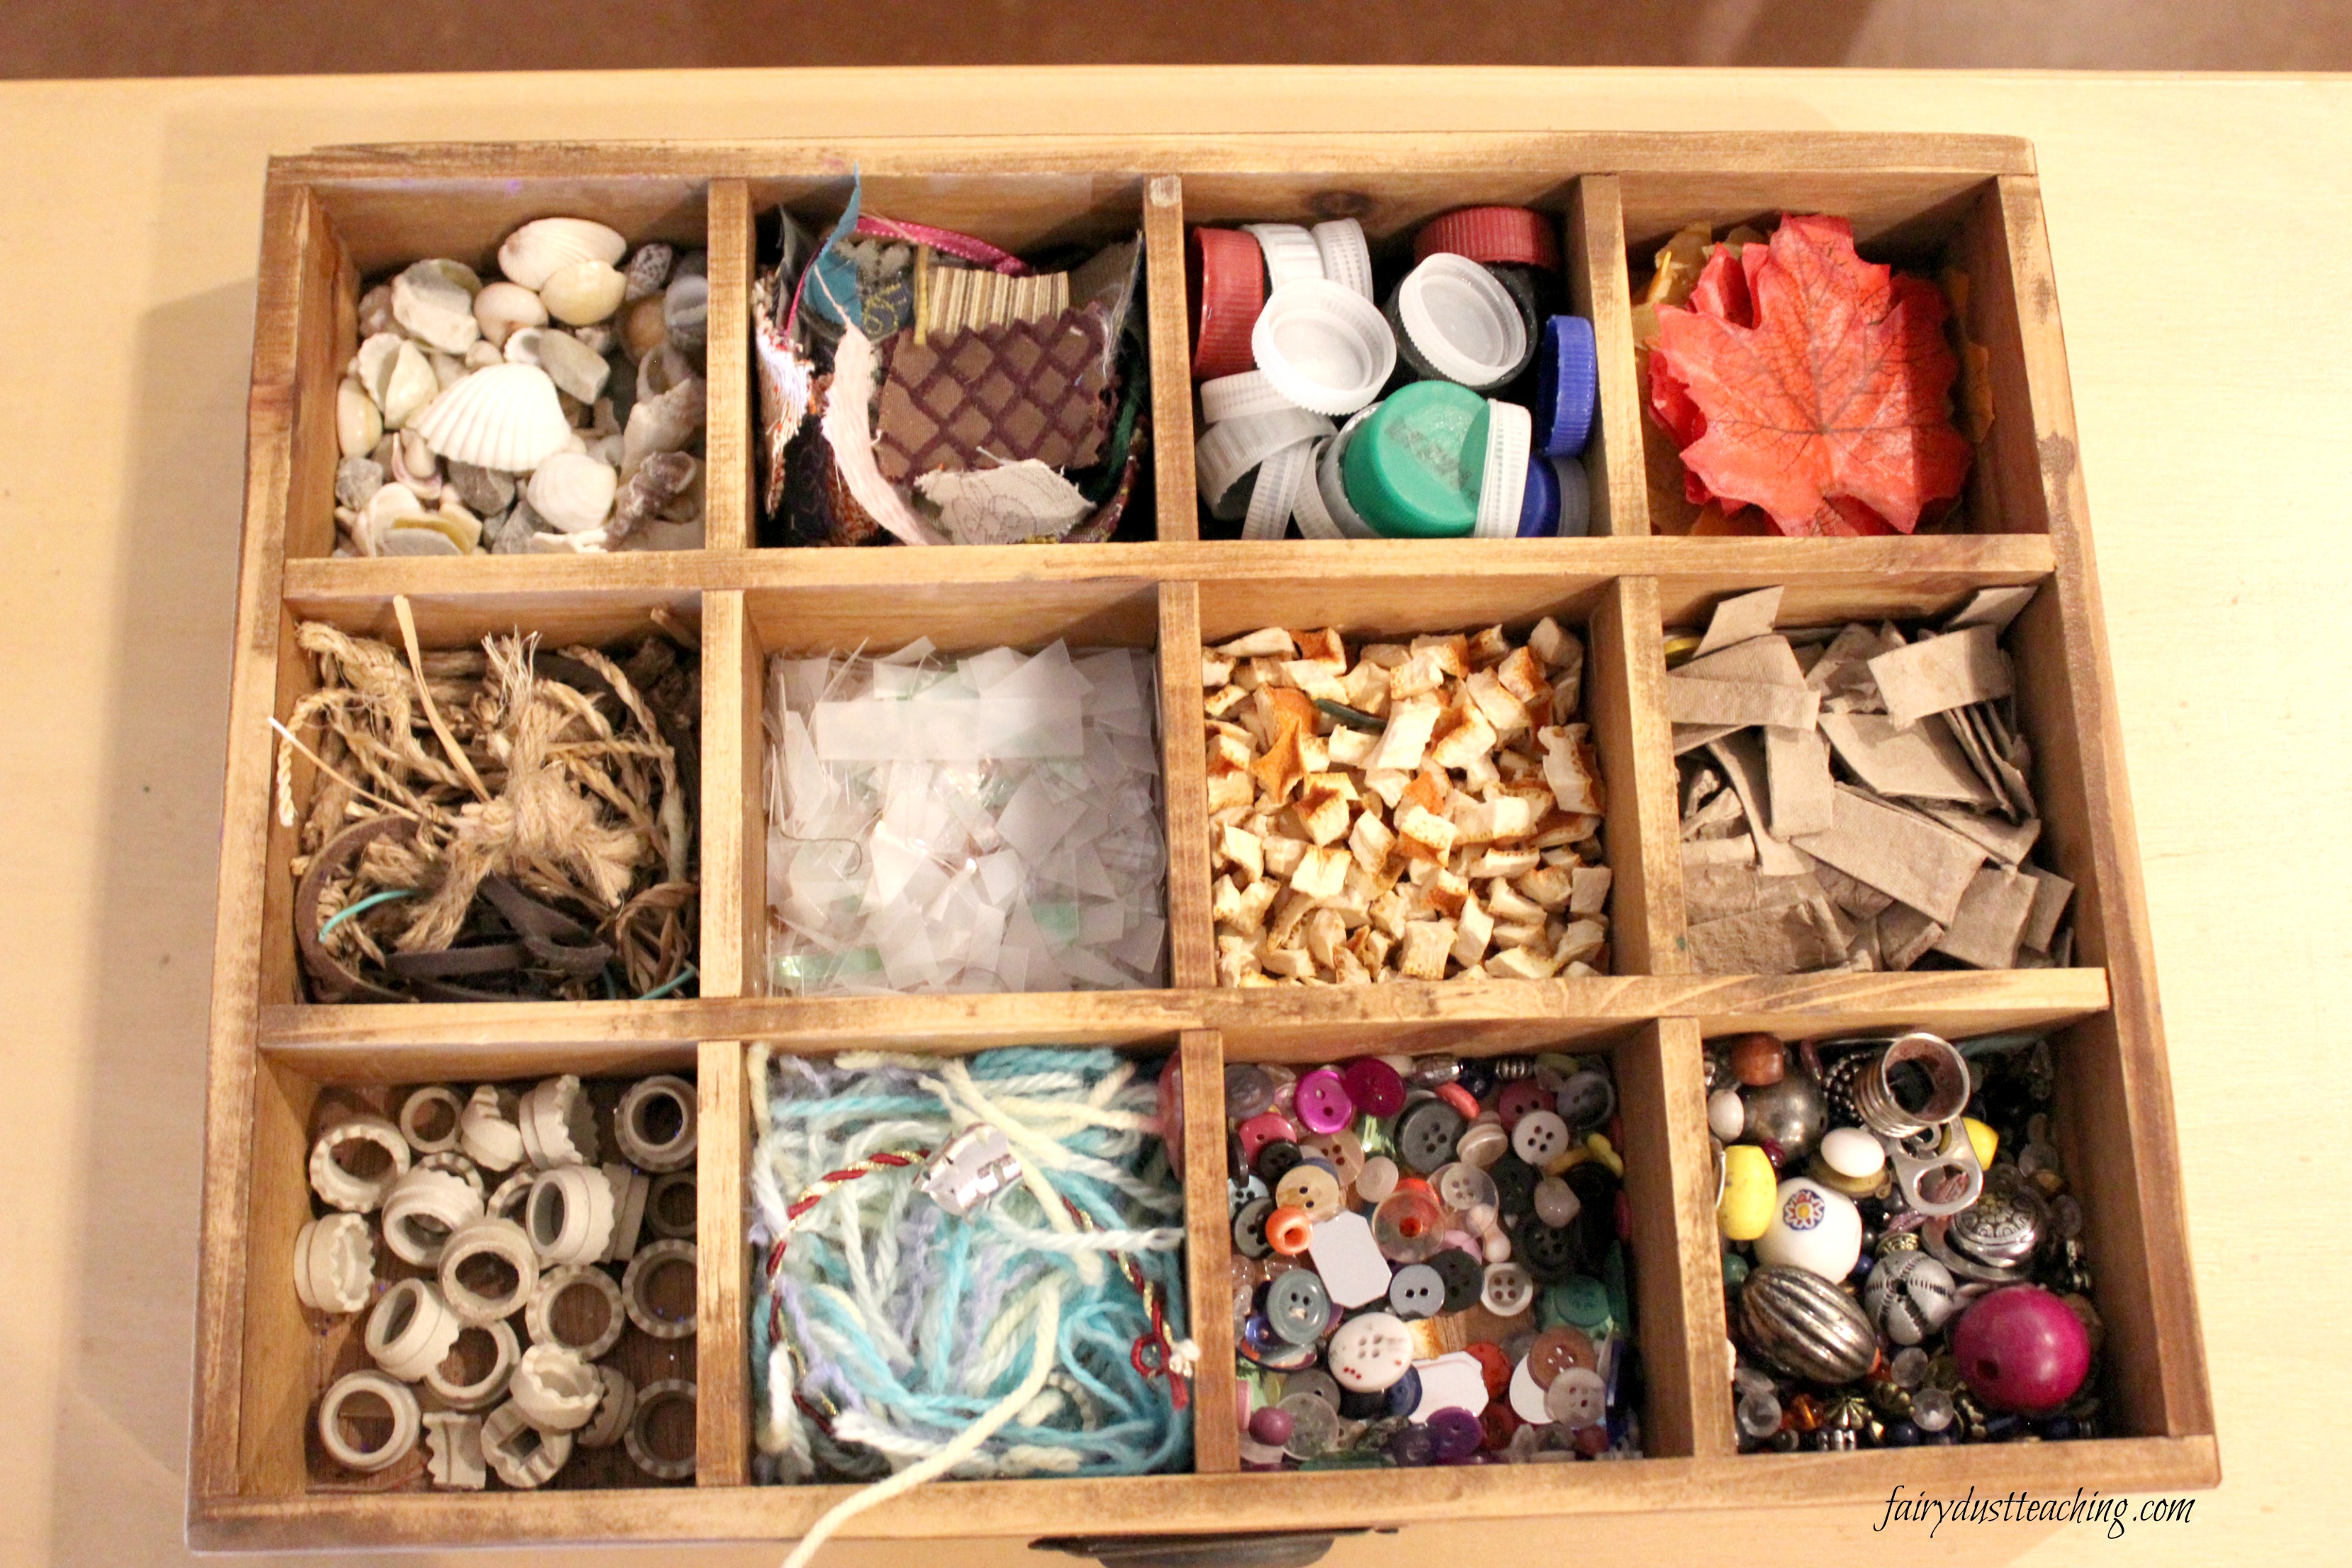 Loose Parts - What Do Children Learn From Loose Parts Play?